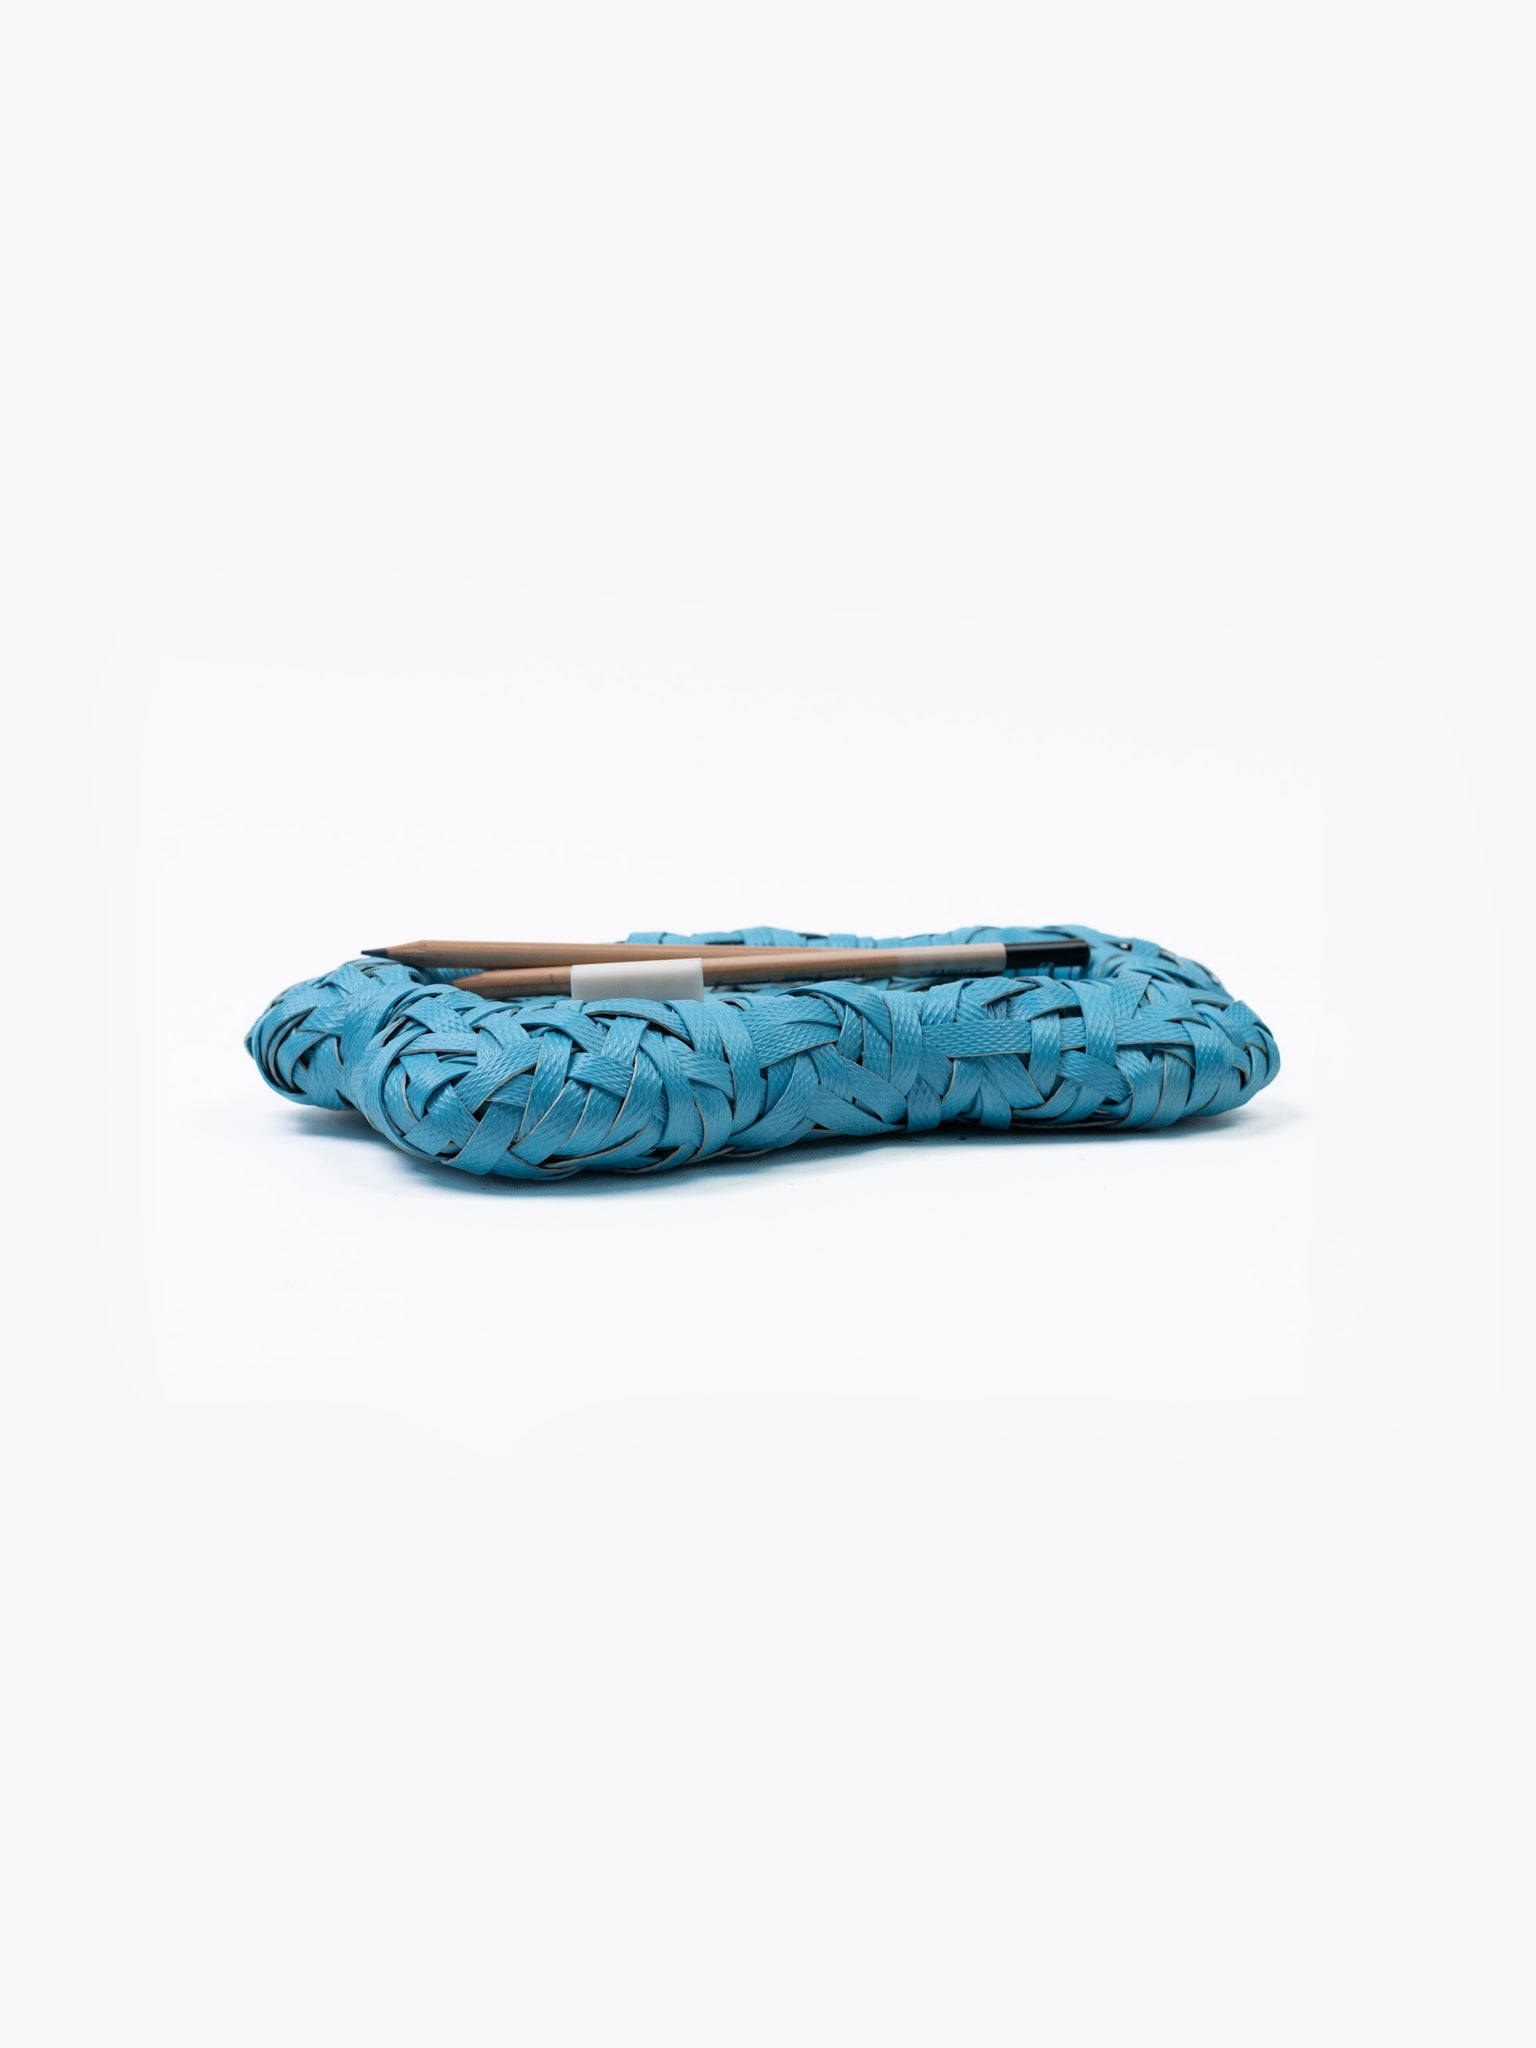 Recycled Plastic Woven Ecology Tray Blue